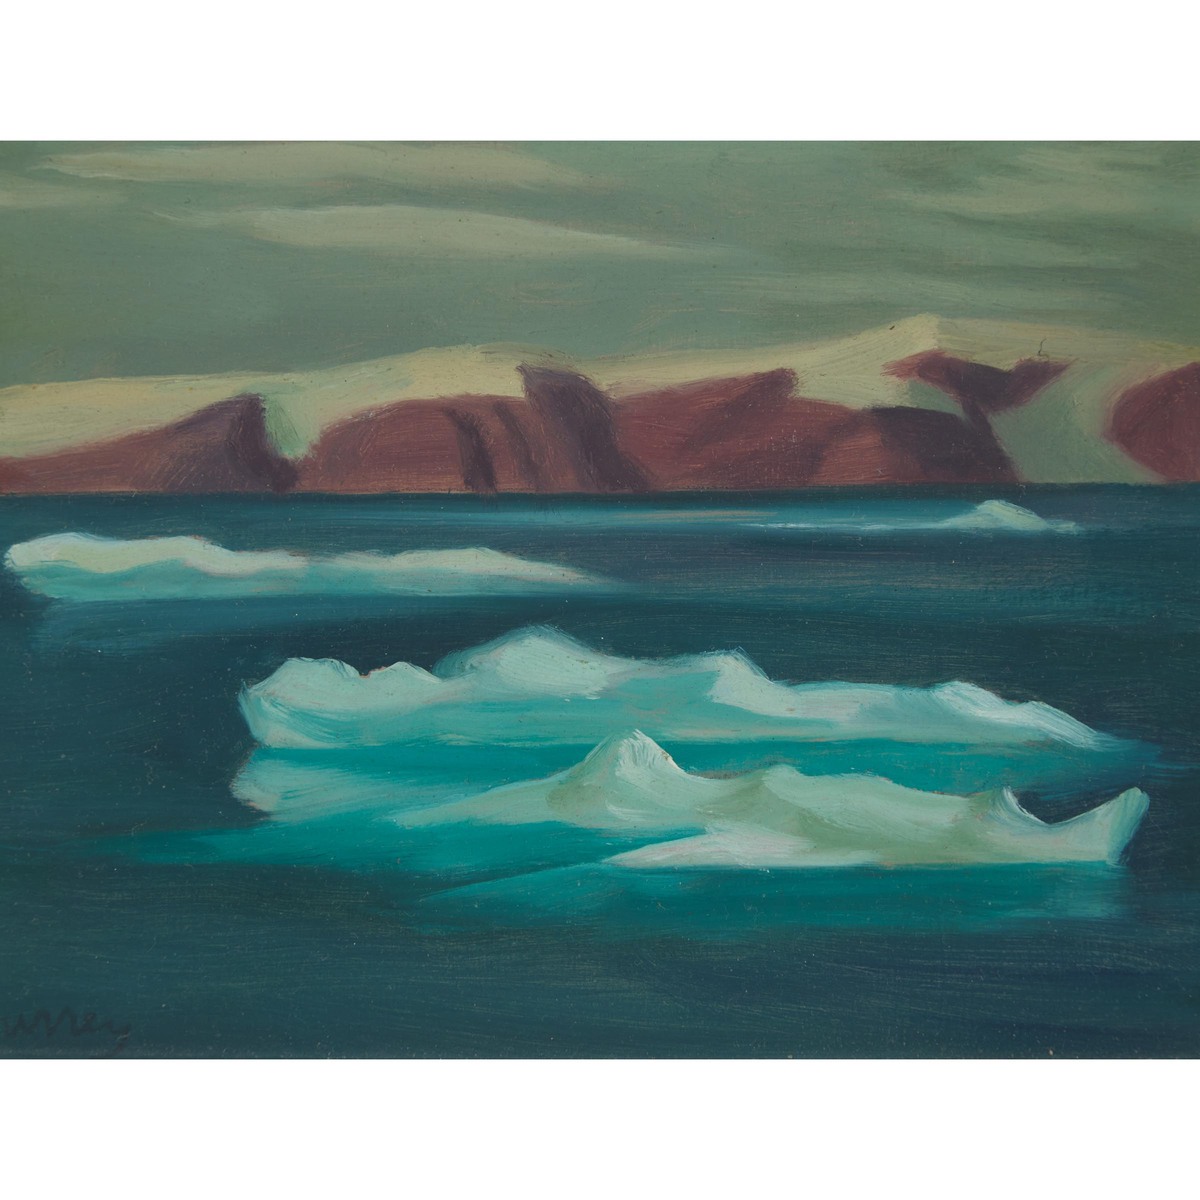 Philip Henry Howard Surrey, RCA (1910-1990), DEVON ISLAND WITH FLOES, 1958, 5.875 x 7.875 in — 14.9